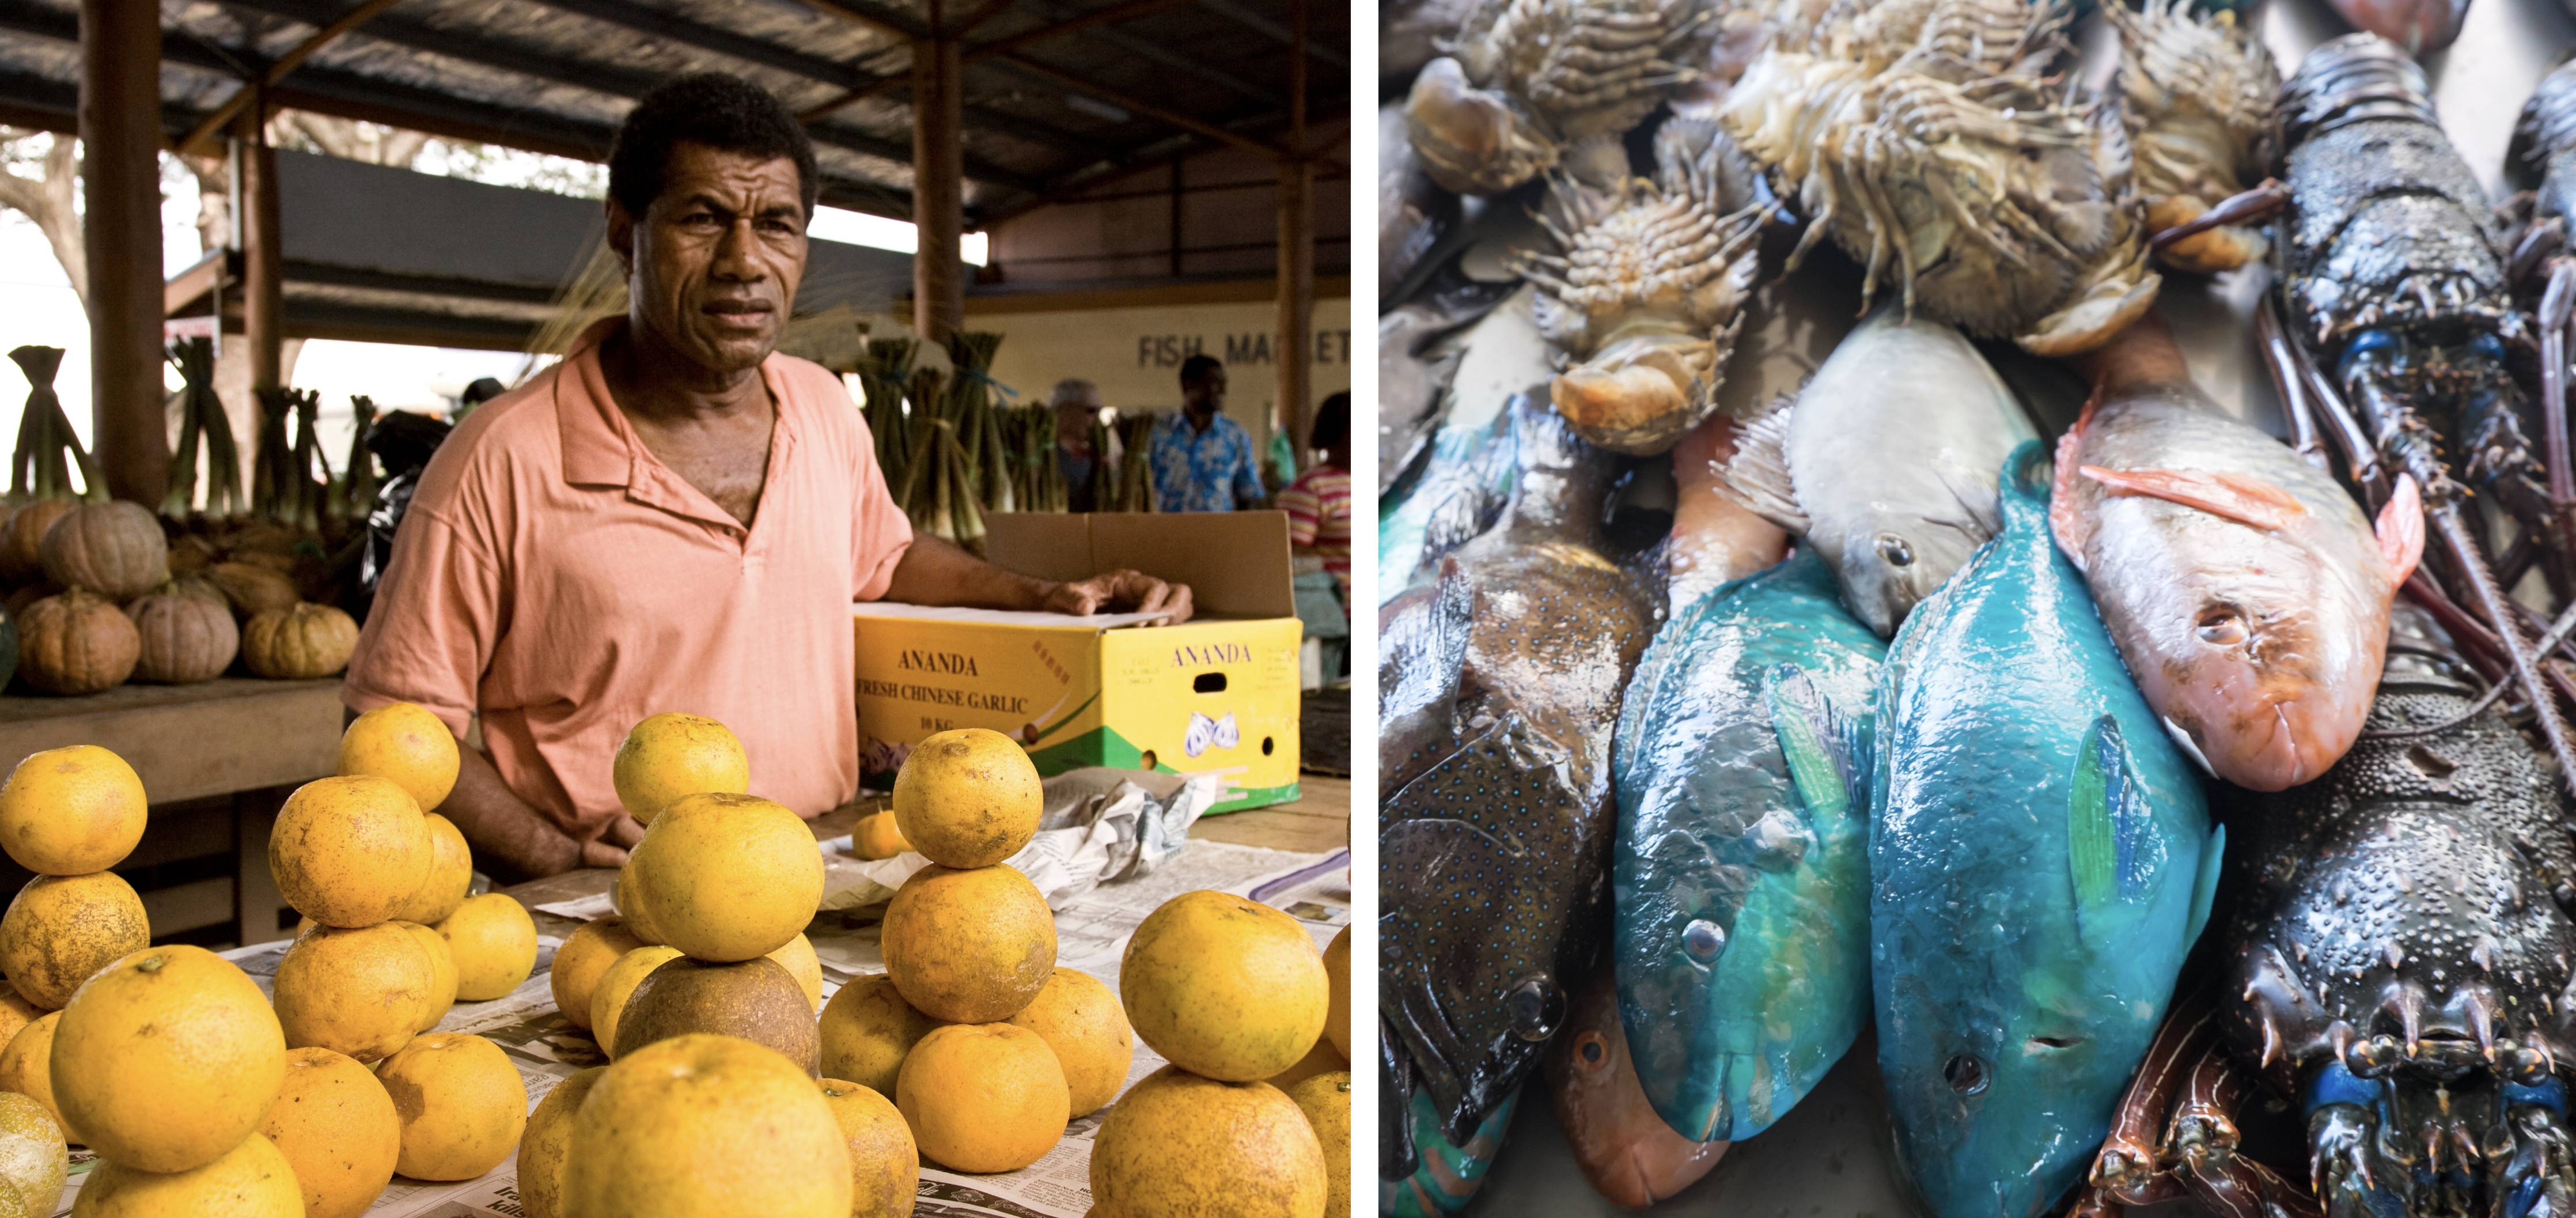 SCP and Circular Economy Policies and Practices for Food Systems in the Pacific